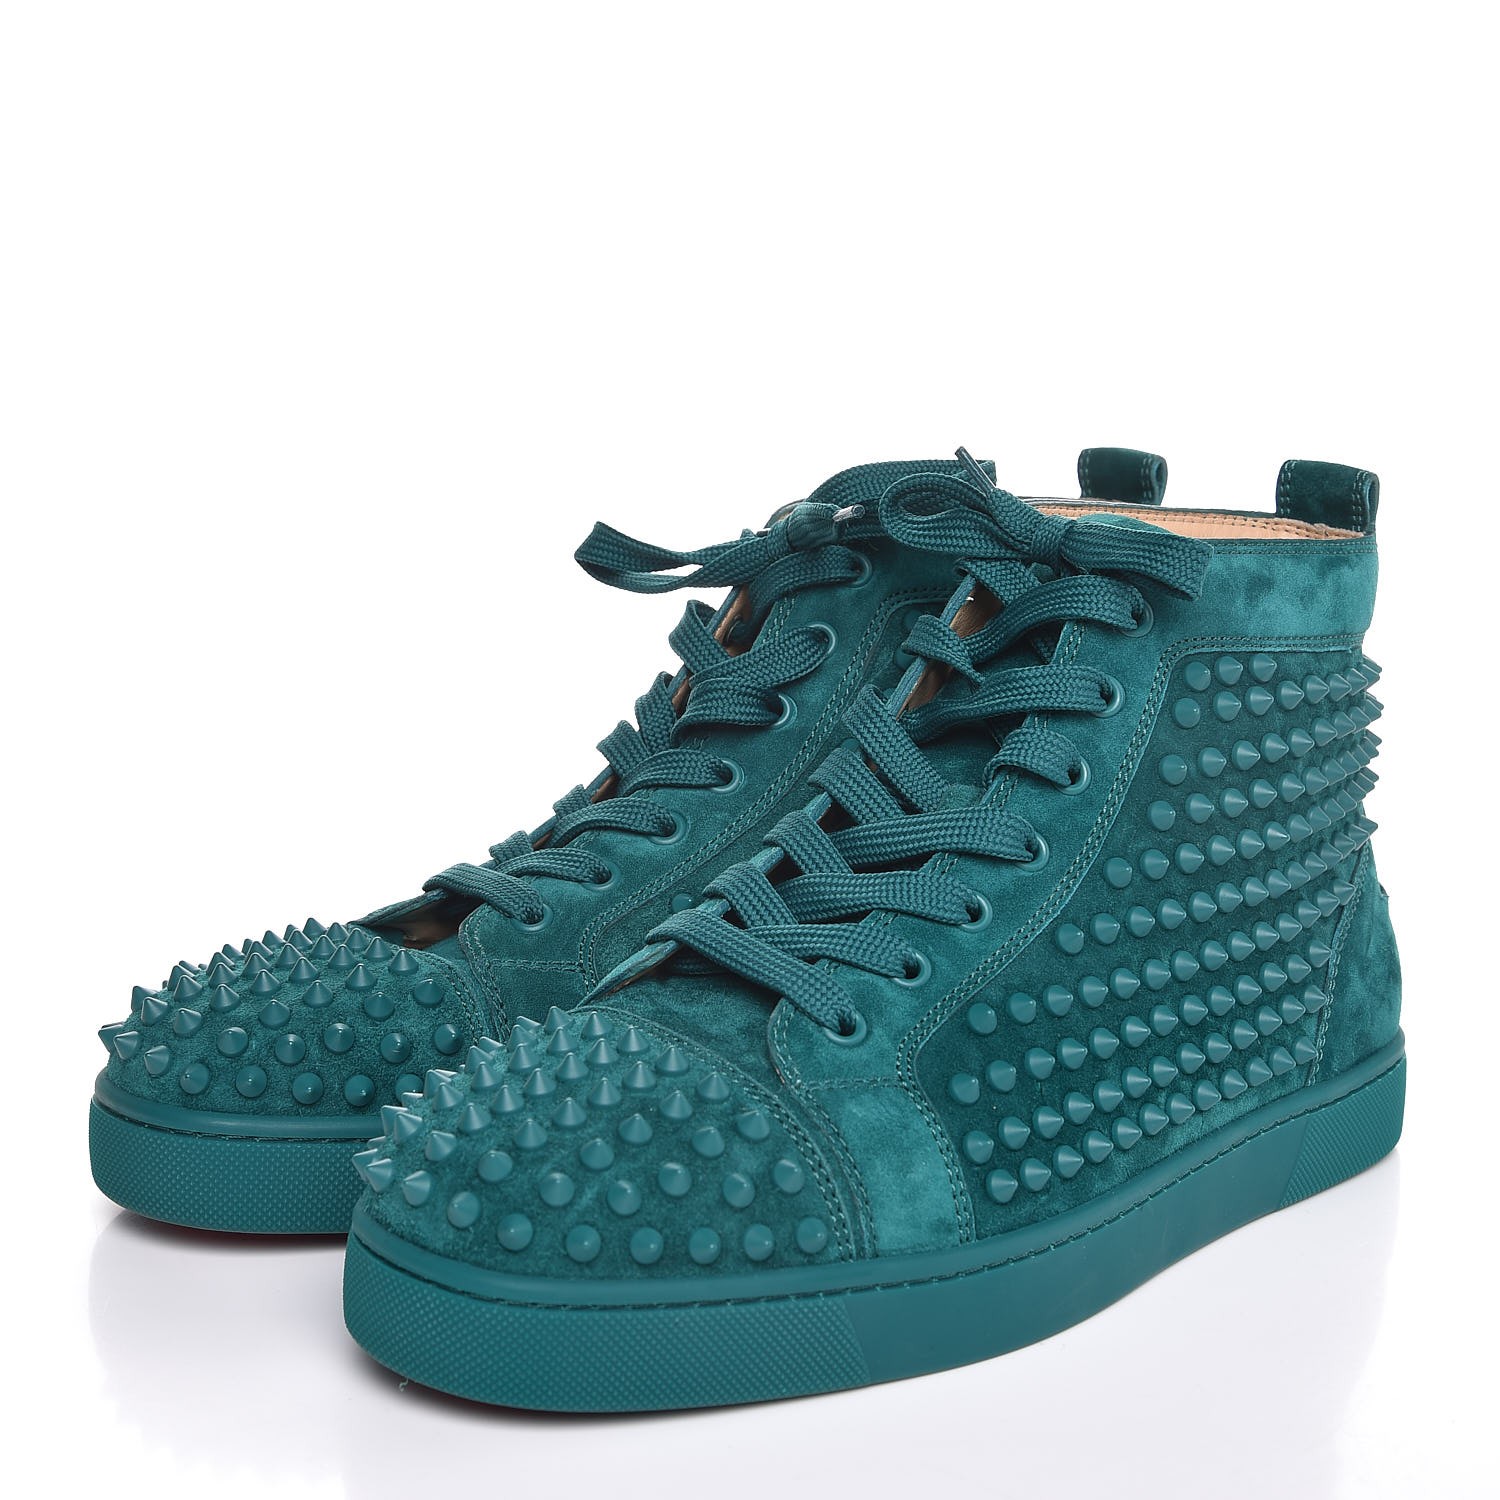 CHRISTIAN LOUBOUTIN Mens Suede Louis Spikes Flat Sneakers 43 Green ...